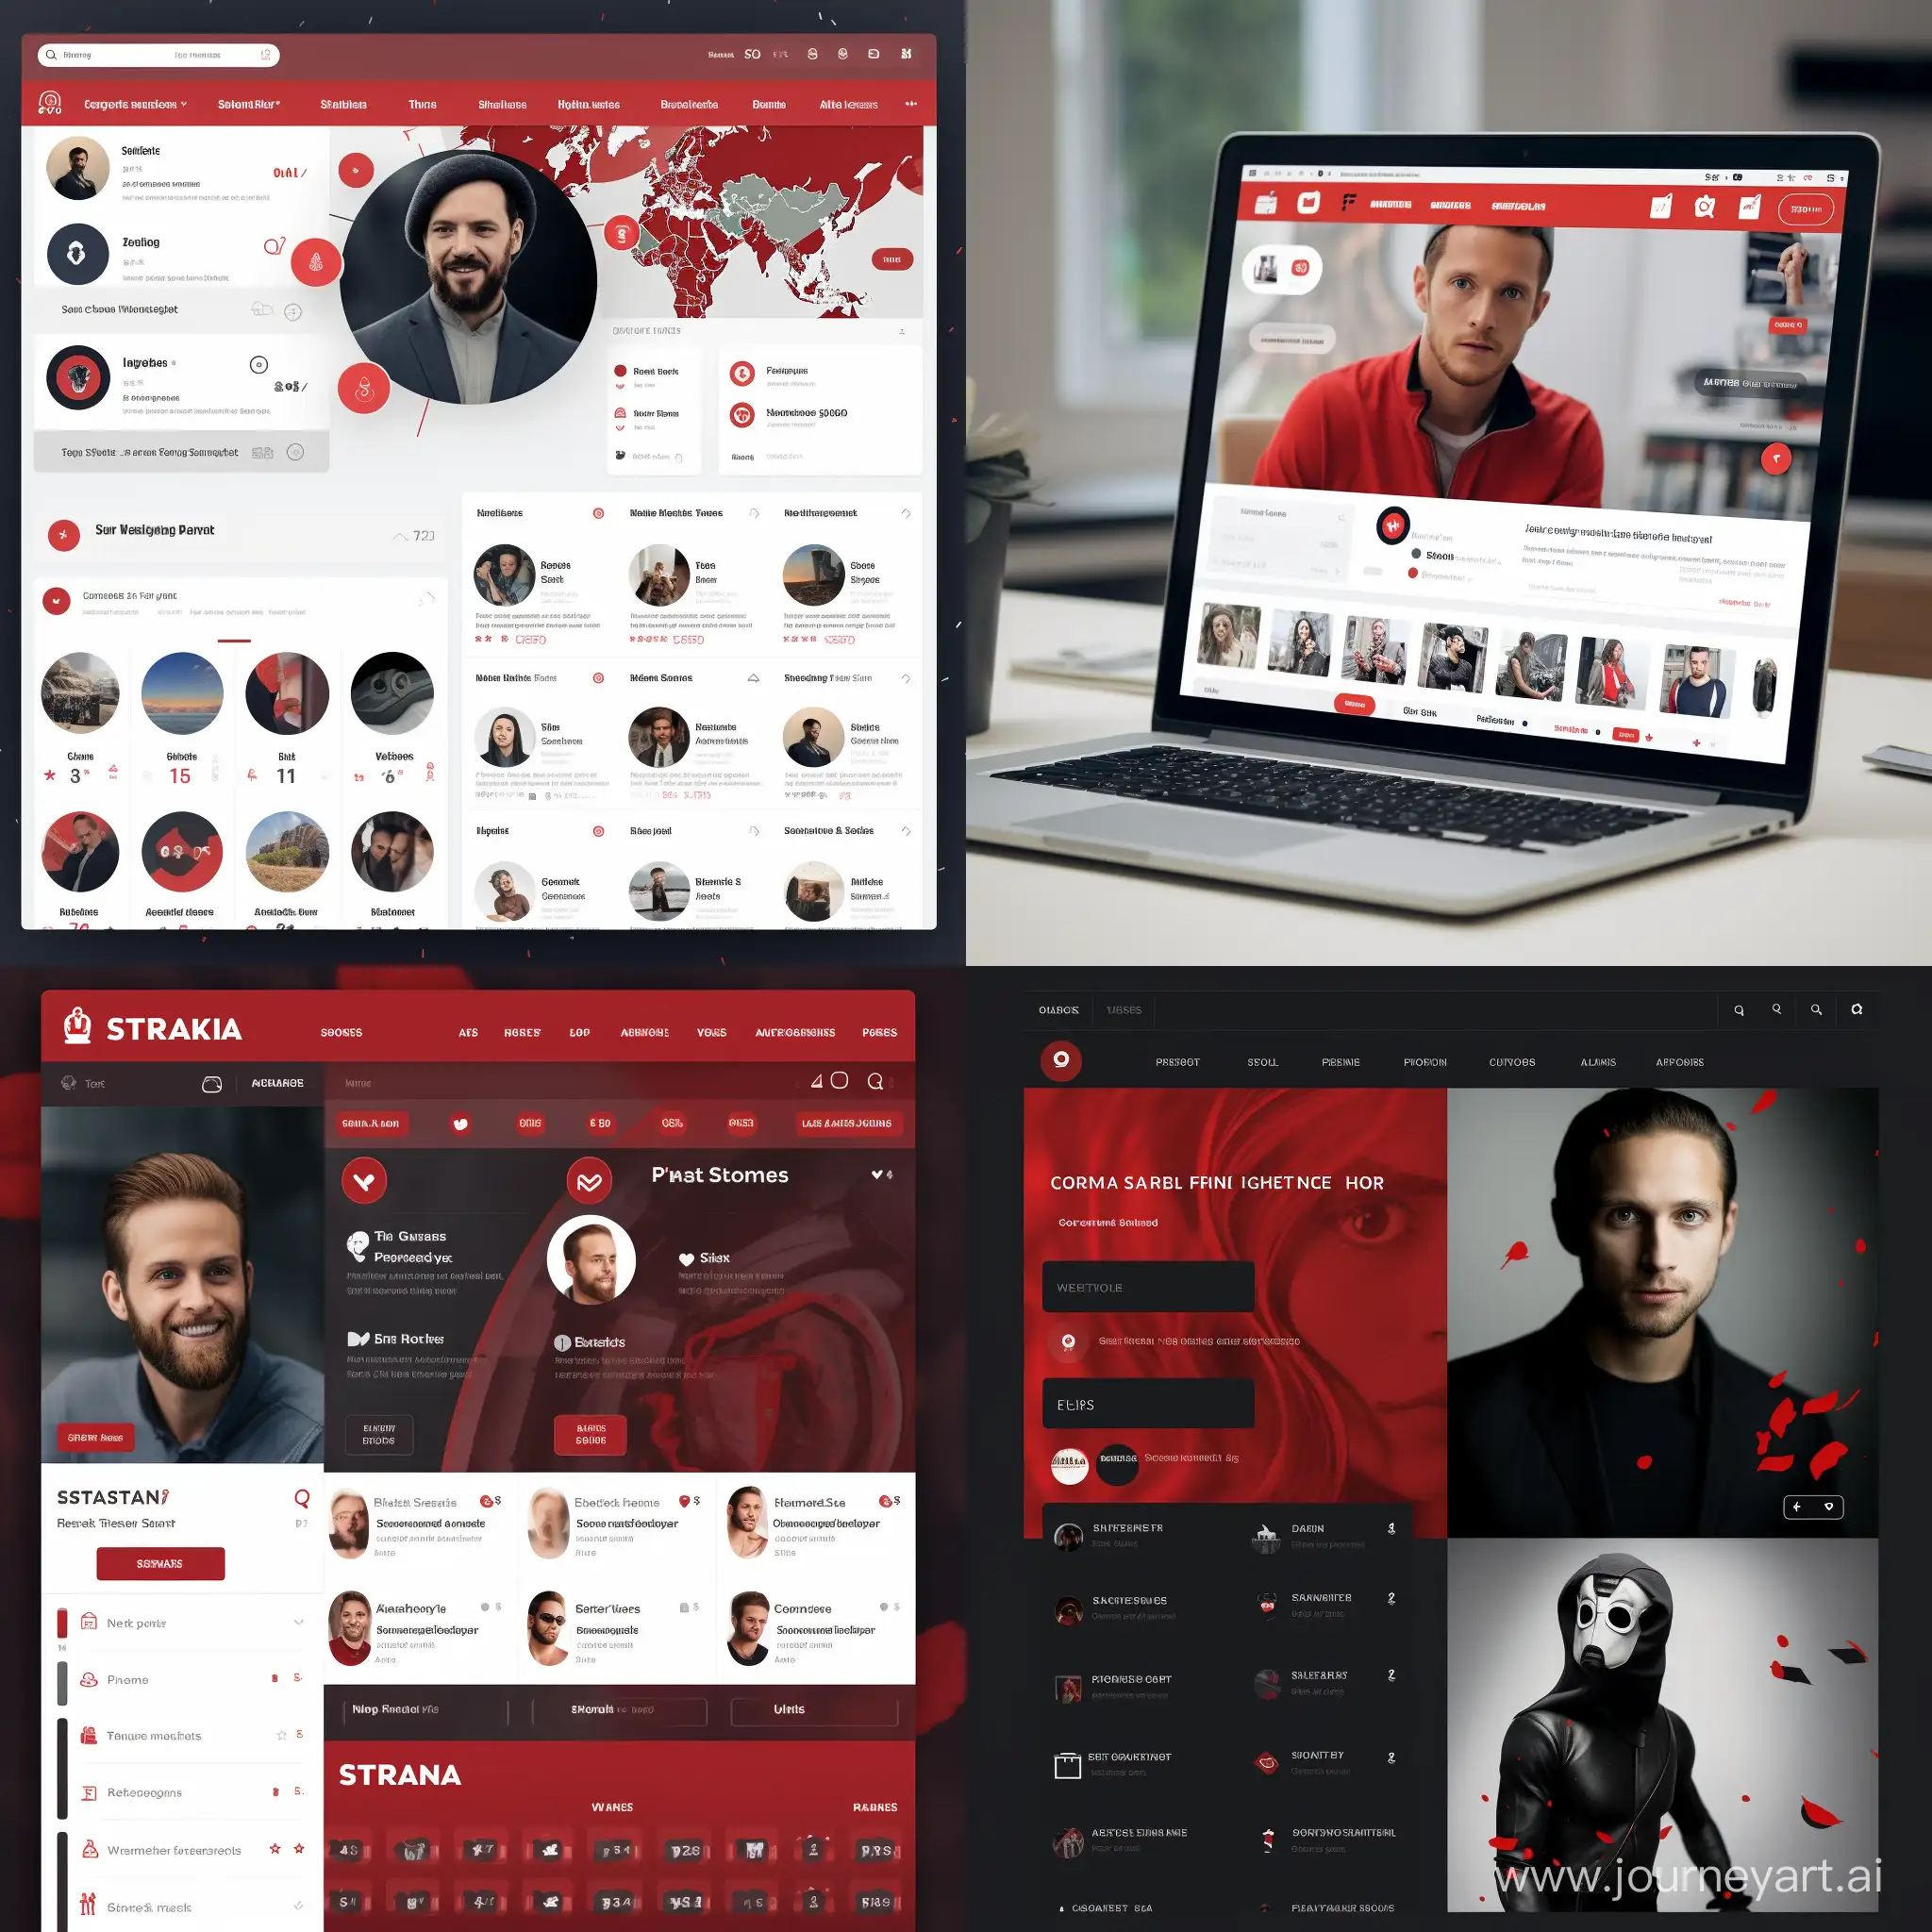 Create a social media template for spartax a spartan brand, use the colors red black and white